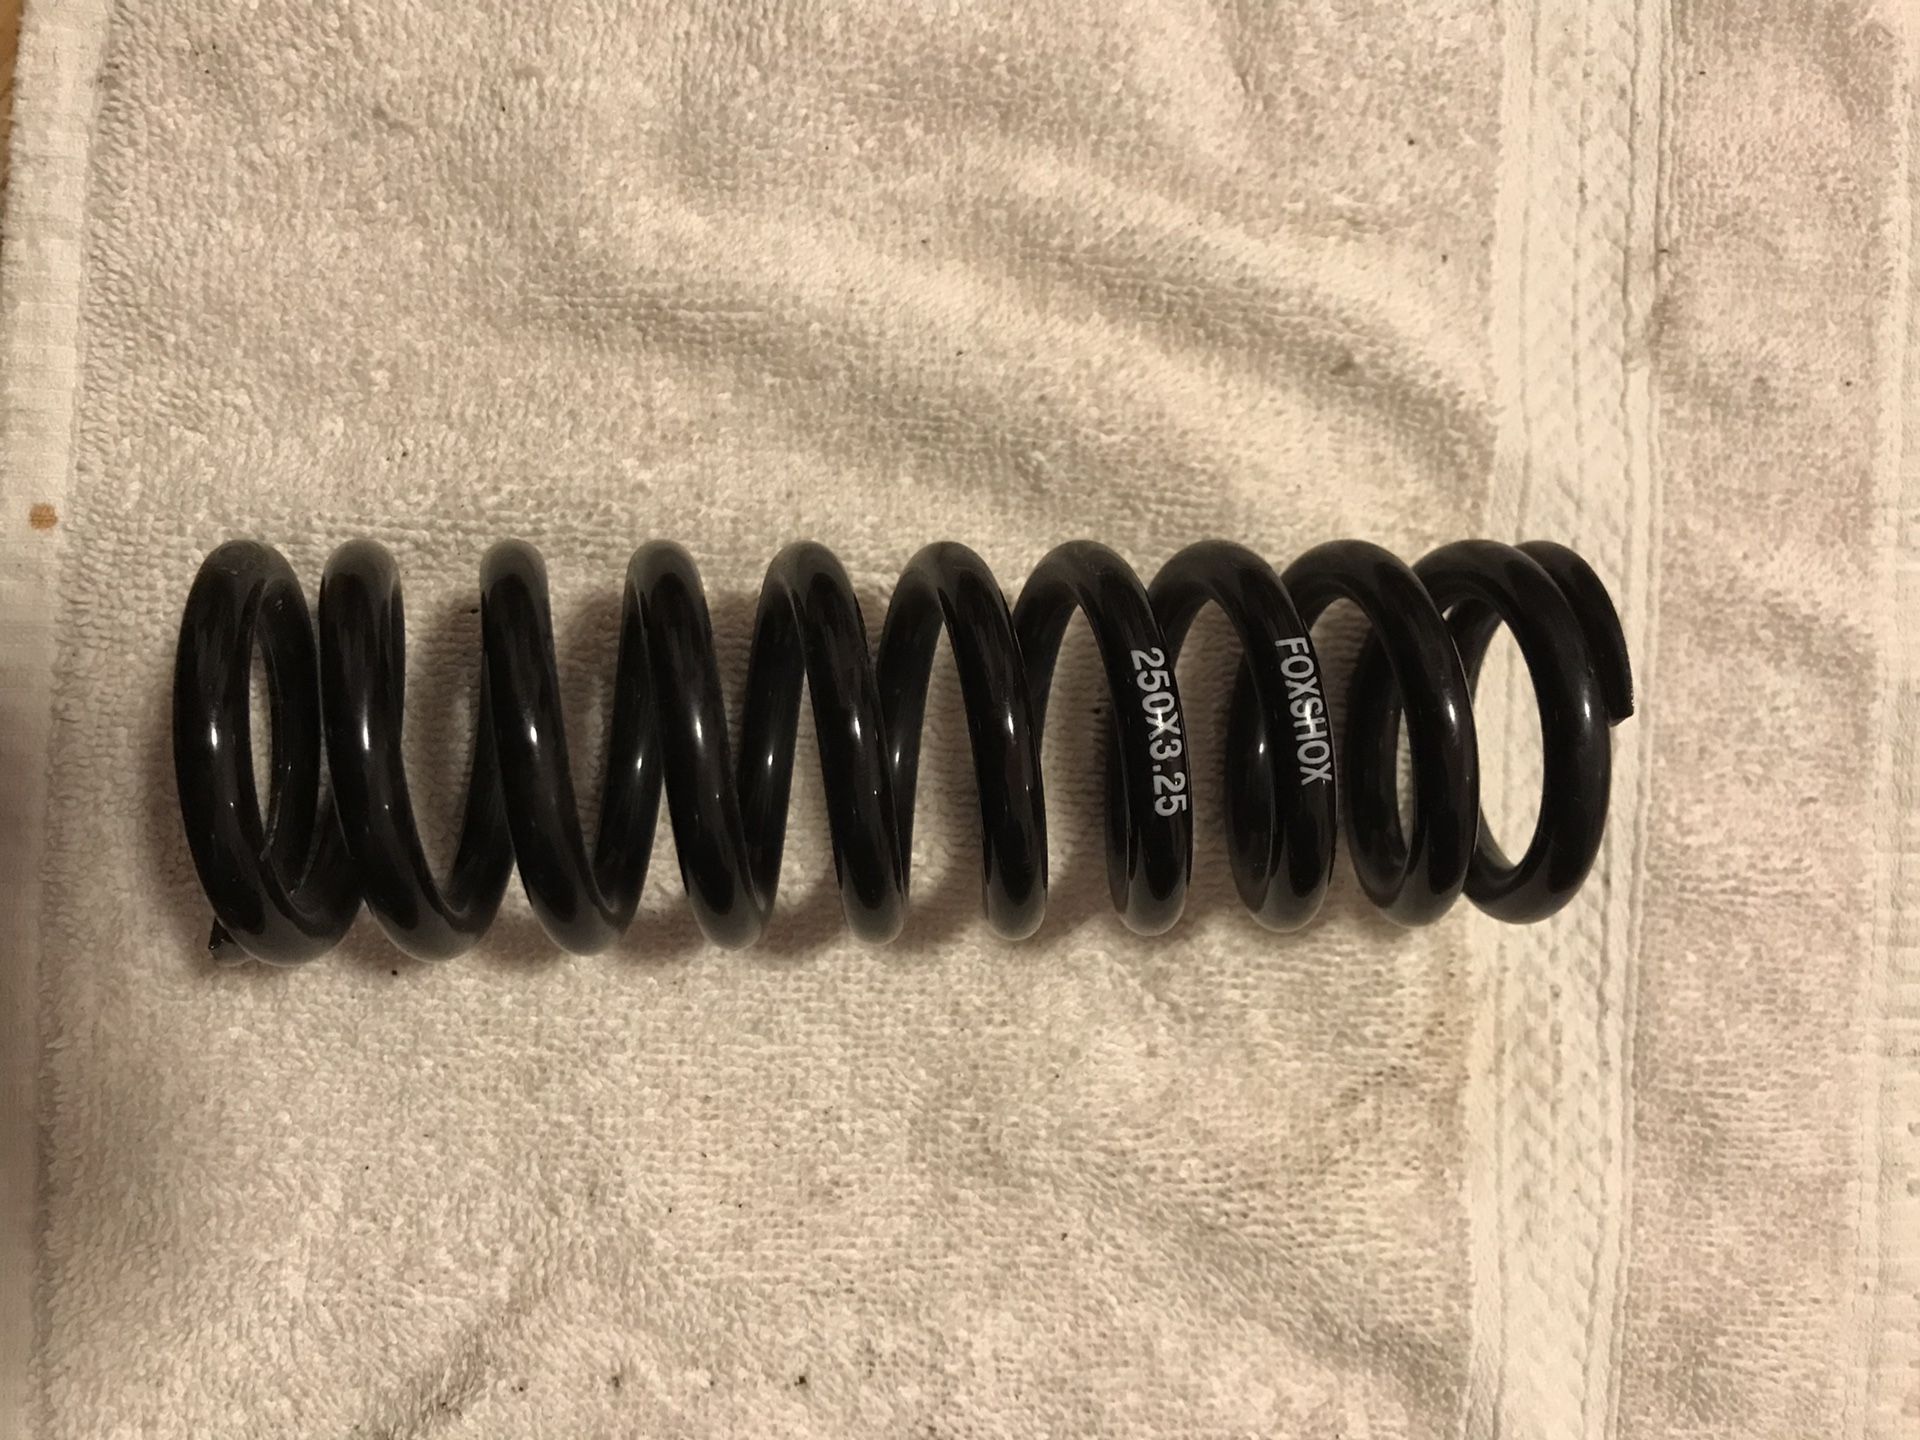 Fox DHX 250 x 3.25 coil spring 250lb for dh downhill for mountain bike